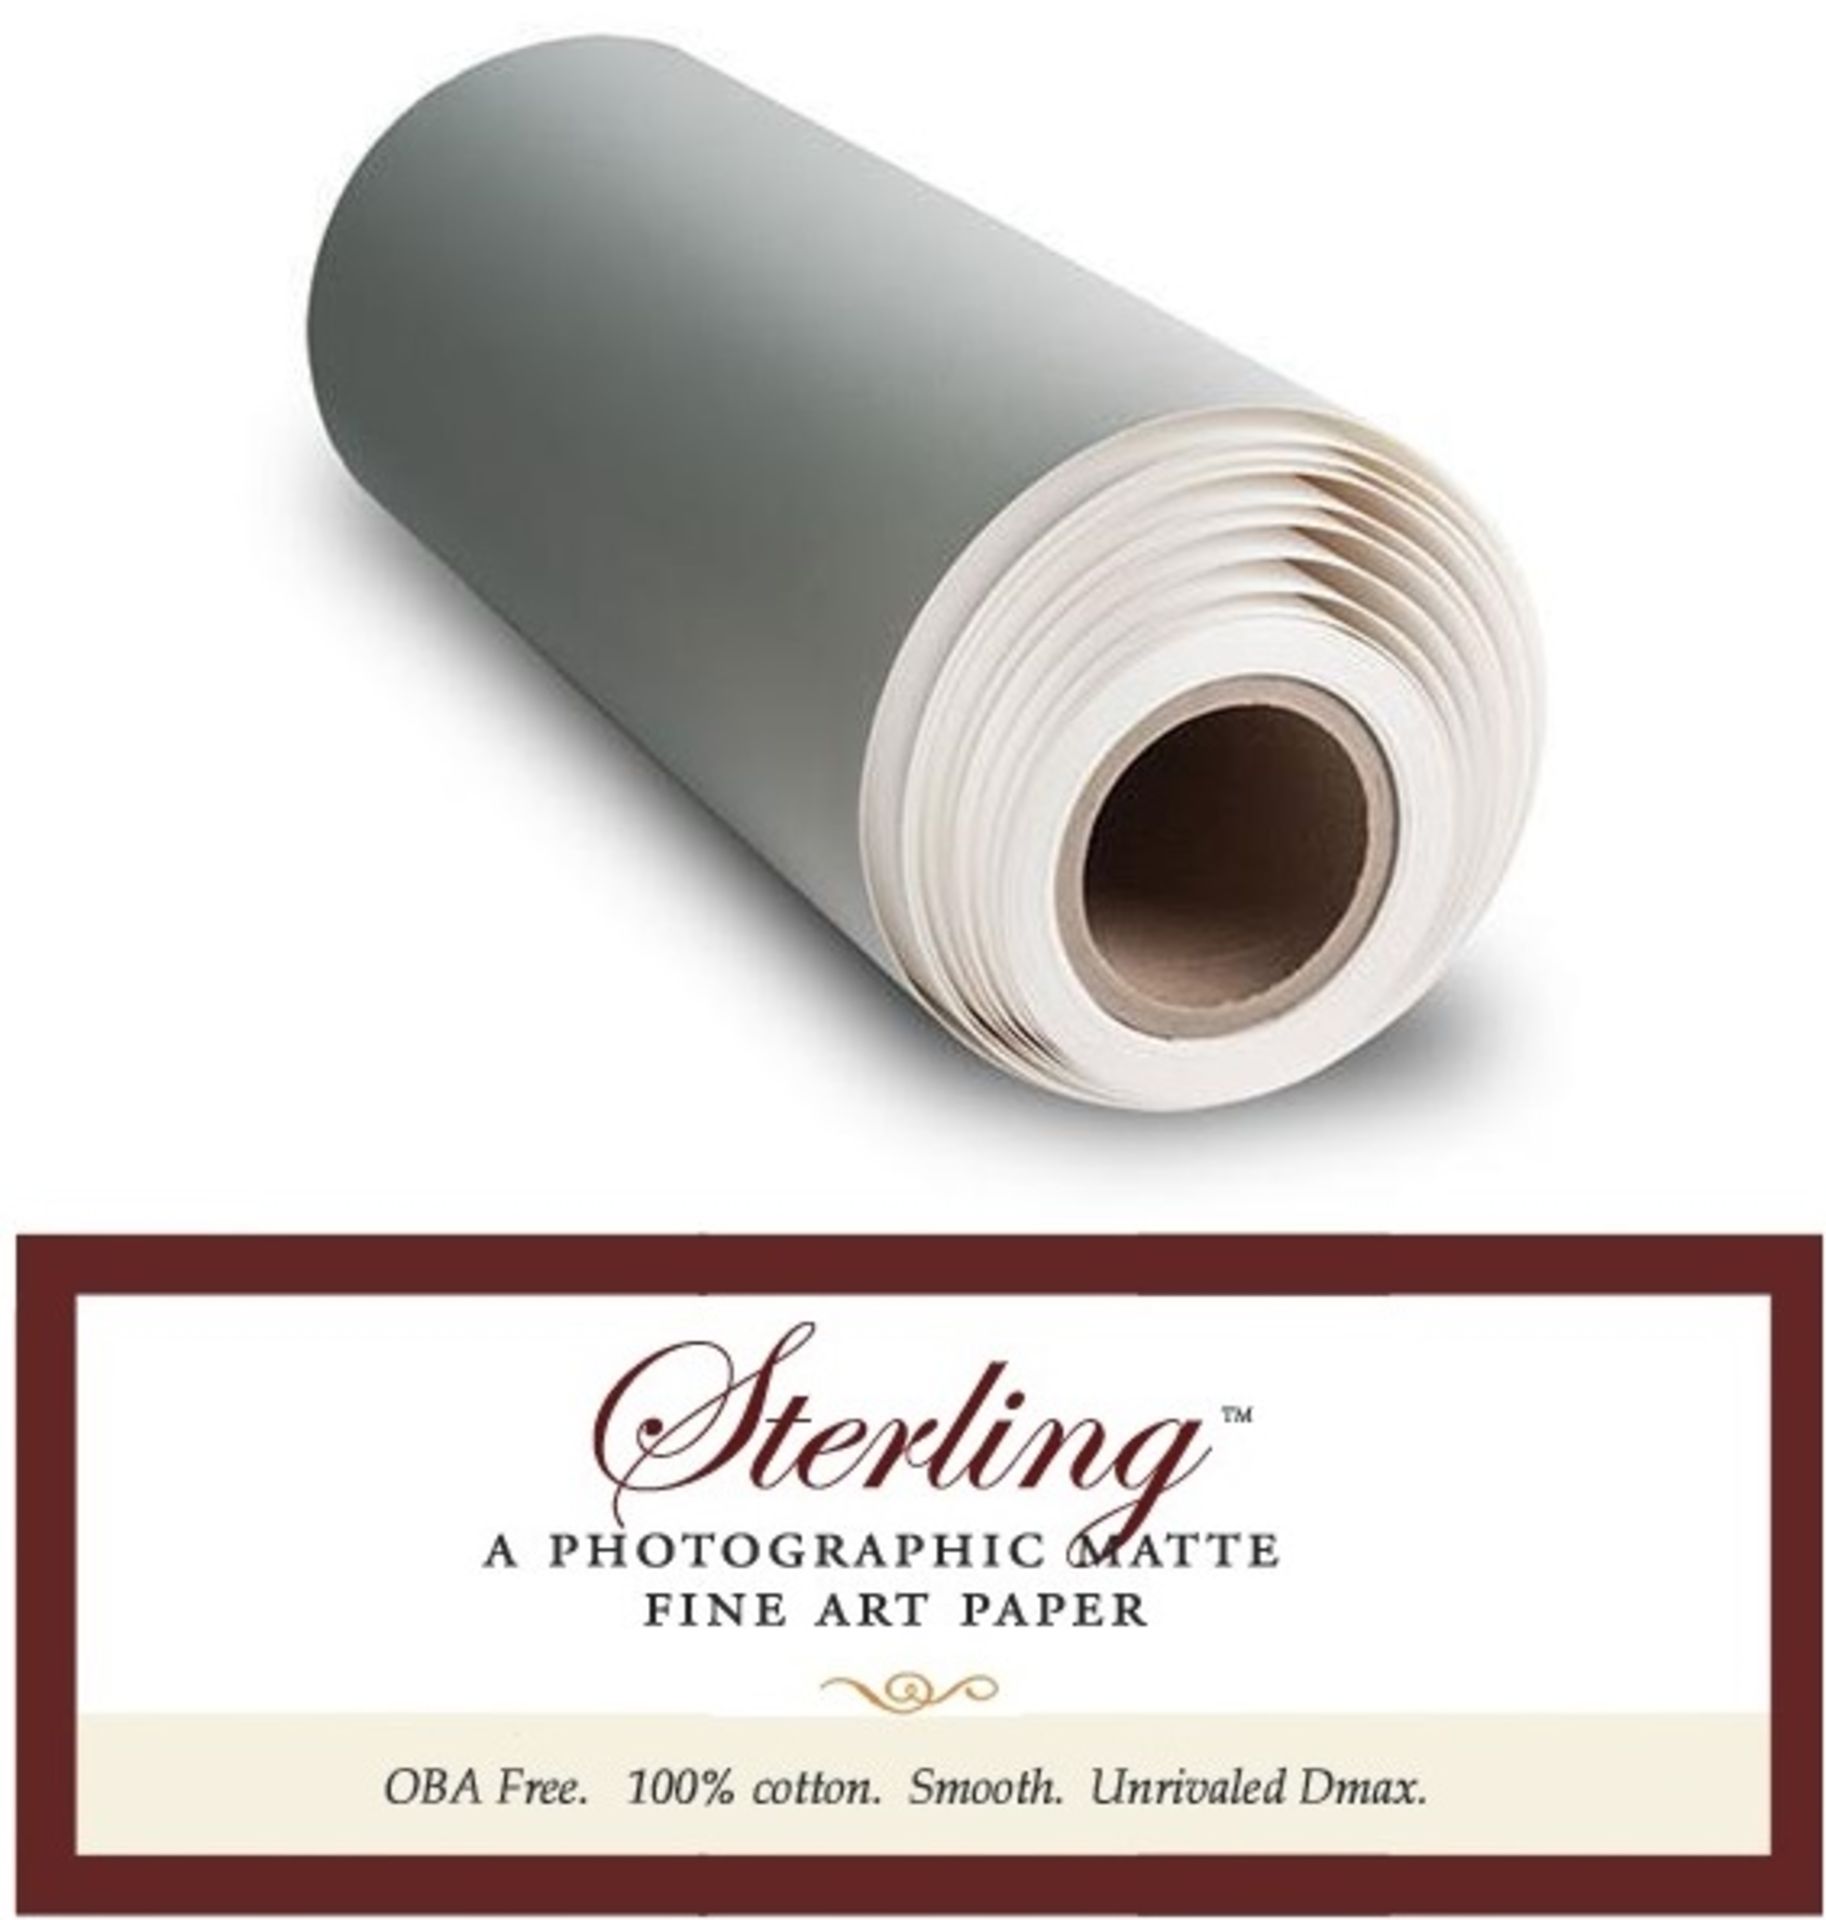 1 x Roll of Breathing Colour STERLING Photographic Matte Fine Art Paper - Size 17" x 50' -